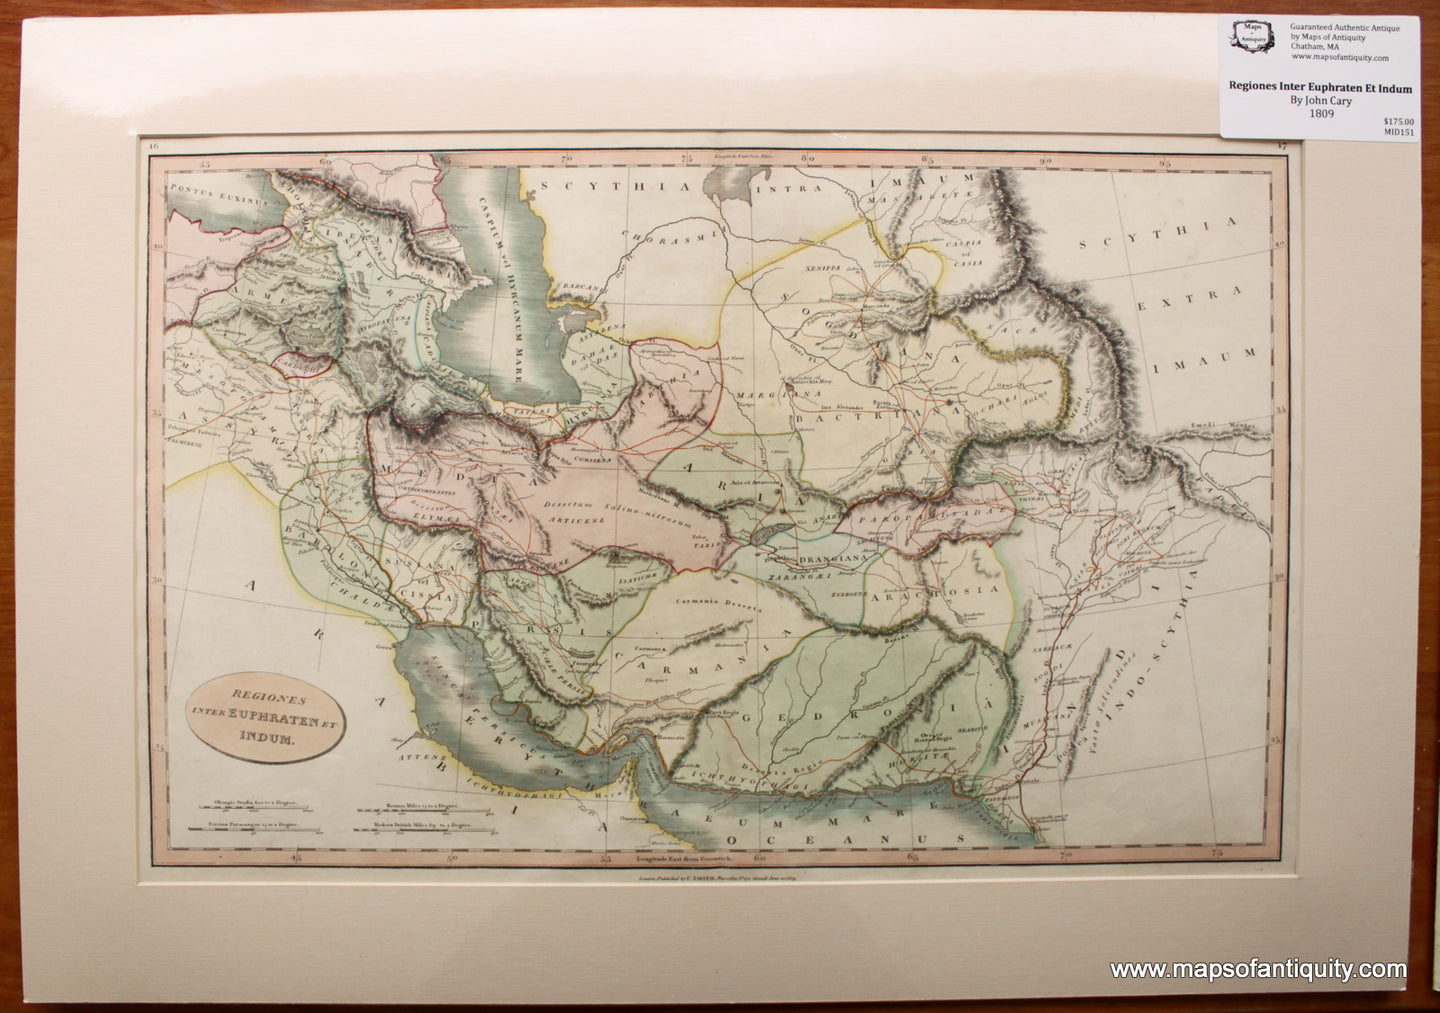 Antique-Hand-Colored-Map-Regiones-Inter-Euphraten-Et-Indum-Middle-East-&-Holy-Land--1809-Cary/Smith-Maps-Of-Antiquity